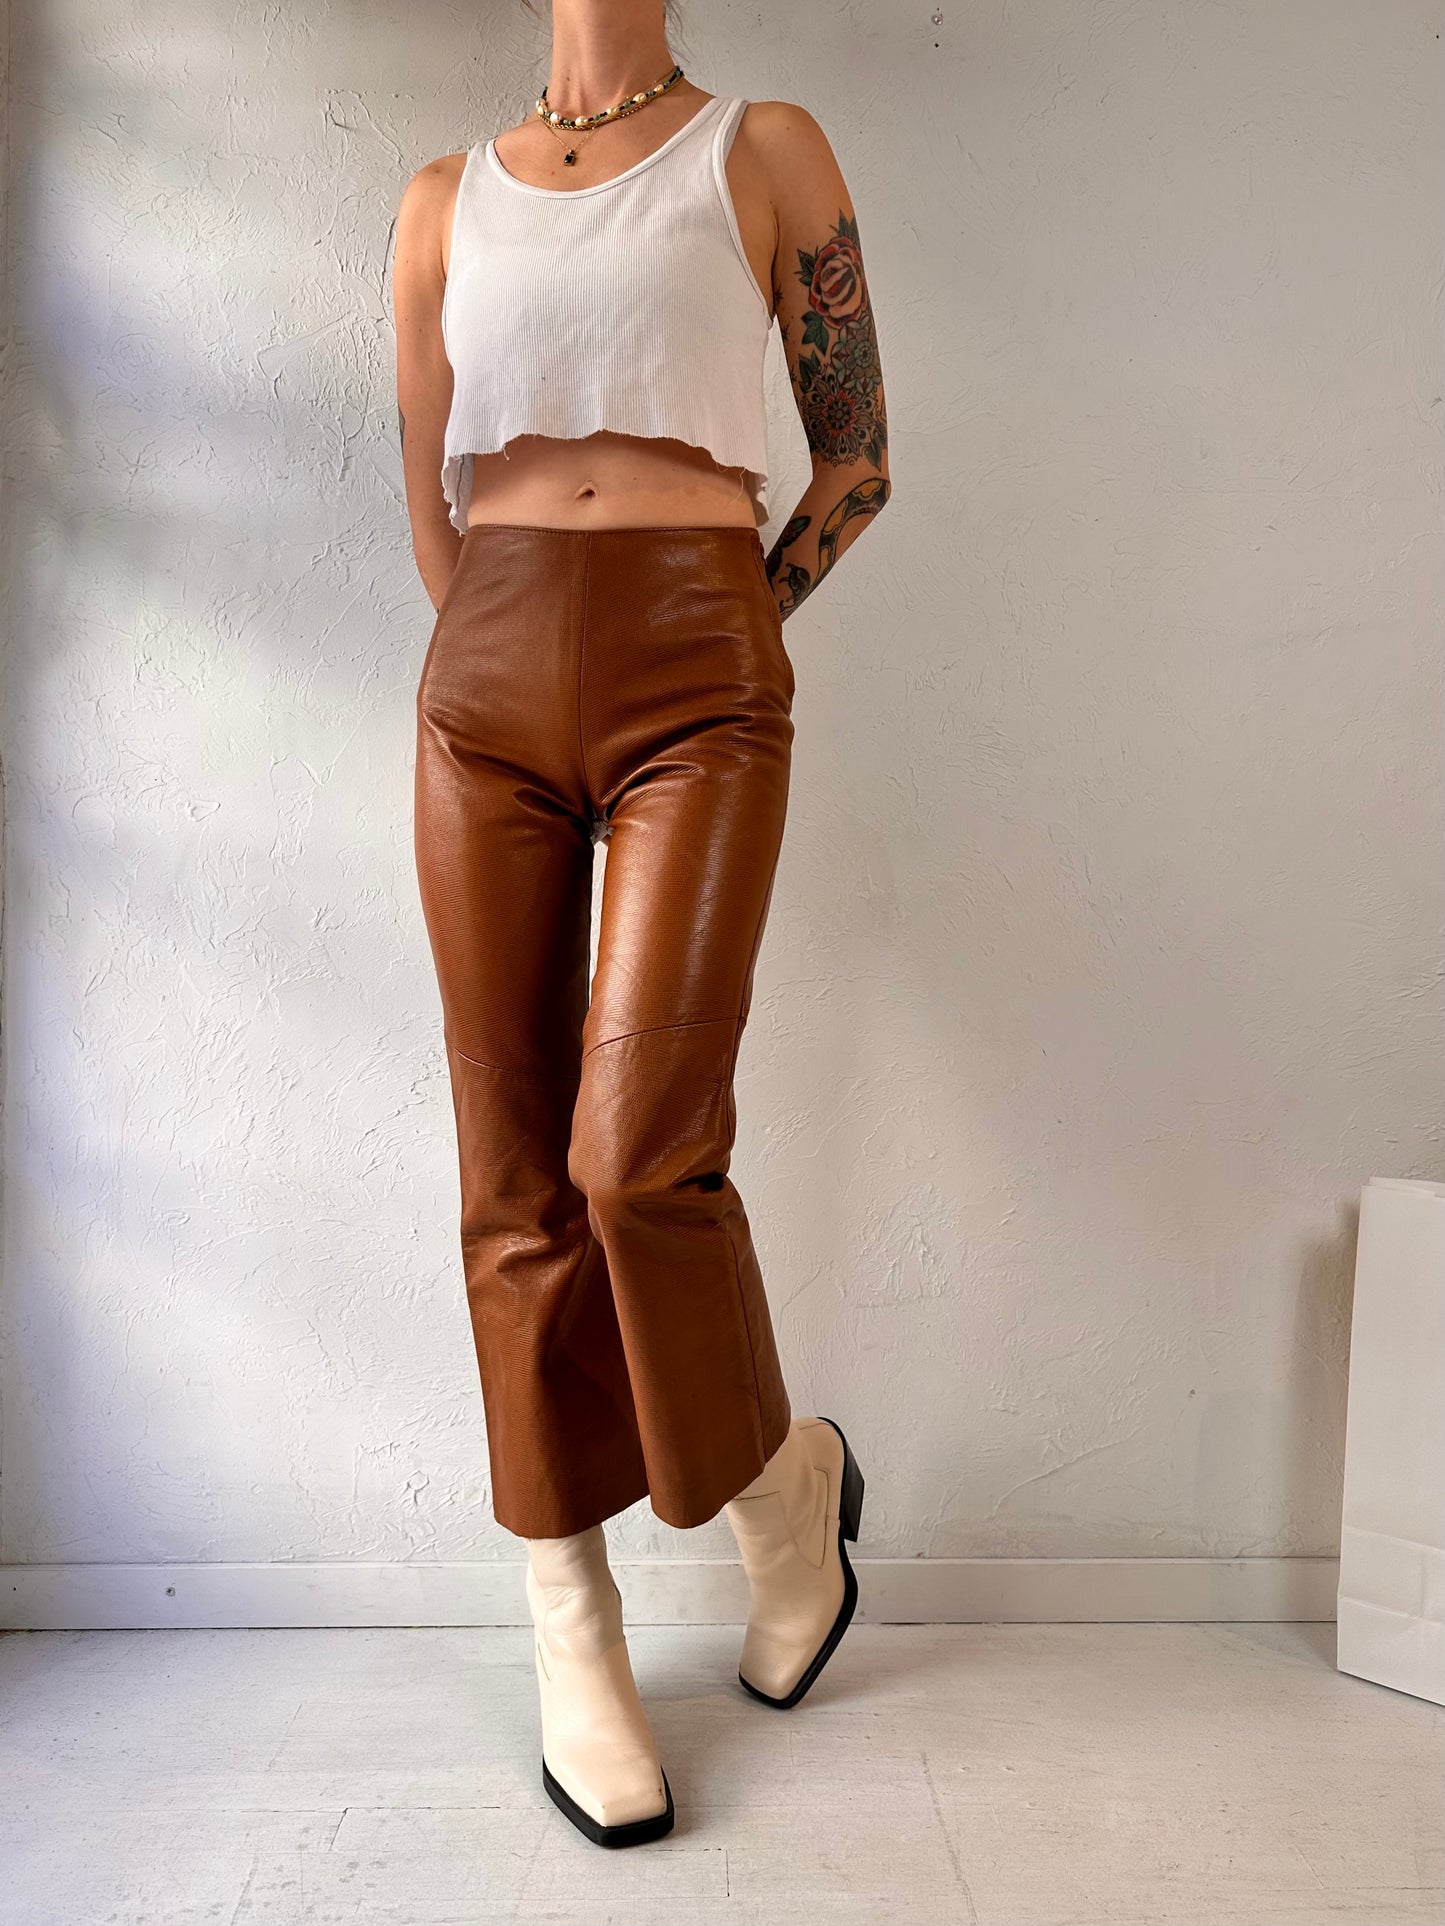 90s 'Danier' Brown Leather Pants / Small